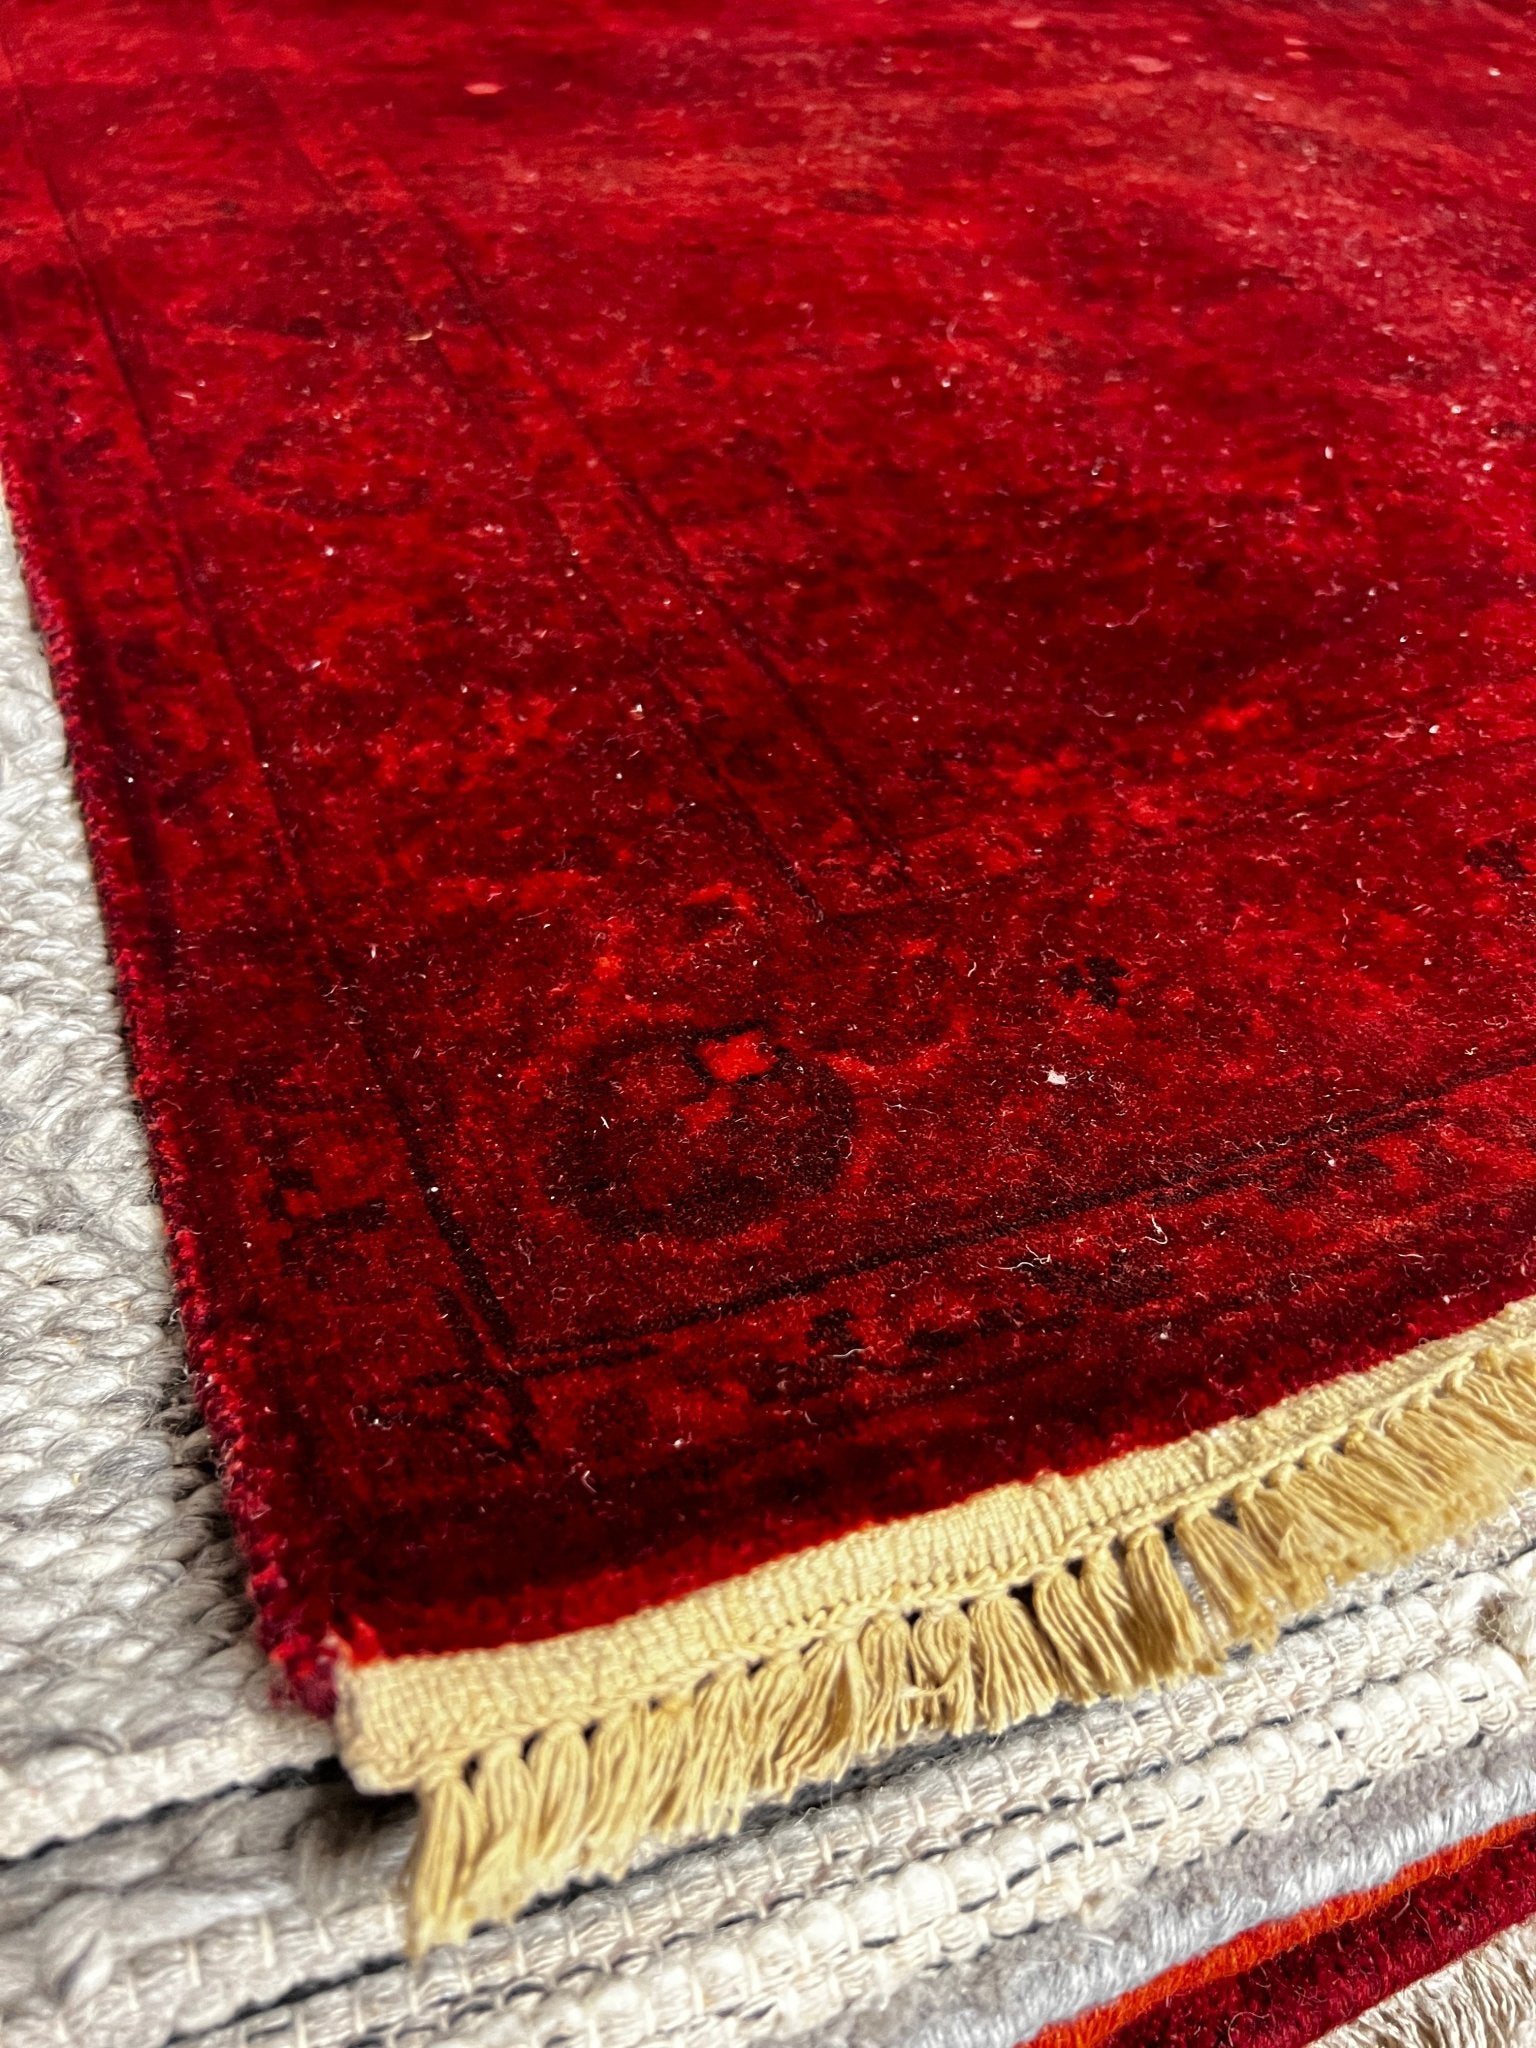 Geertruida 4x5.9 Over Dyed Red All Over | Banana Manor Rug Factory Outlet